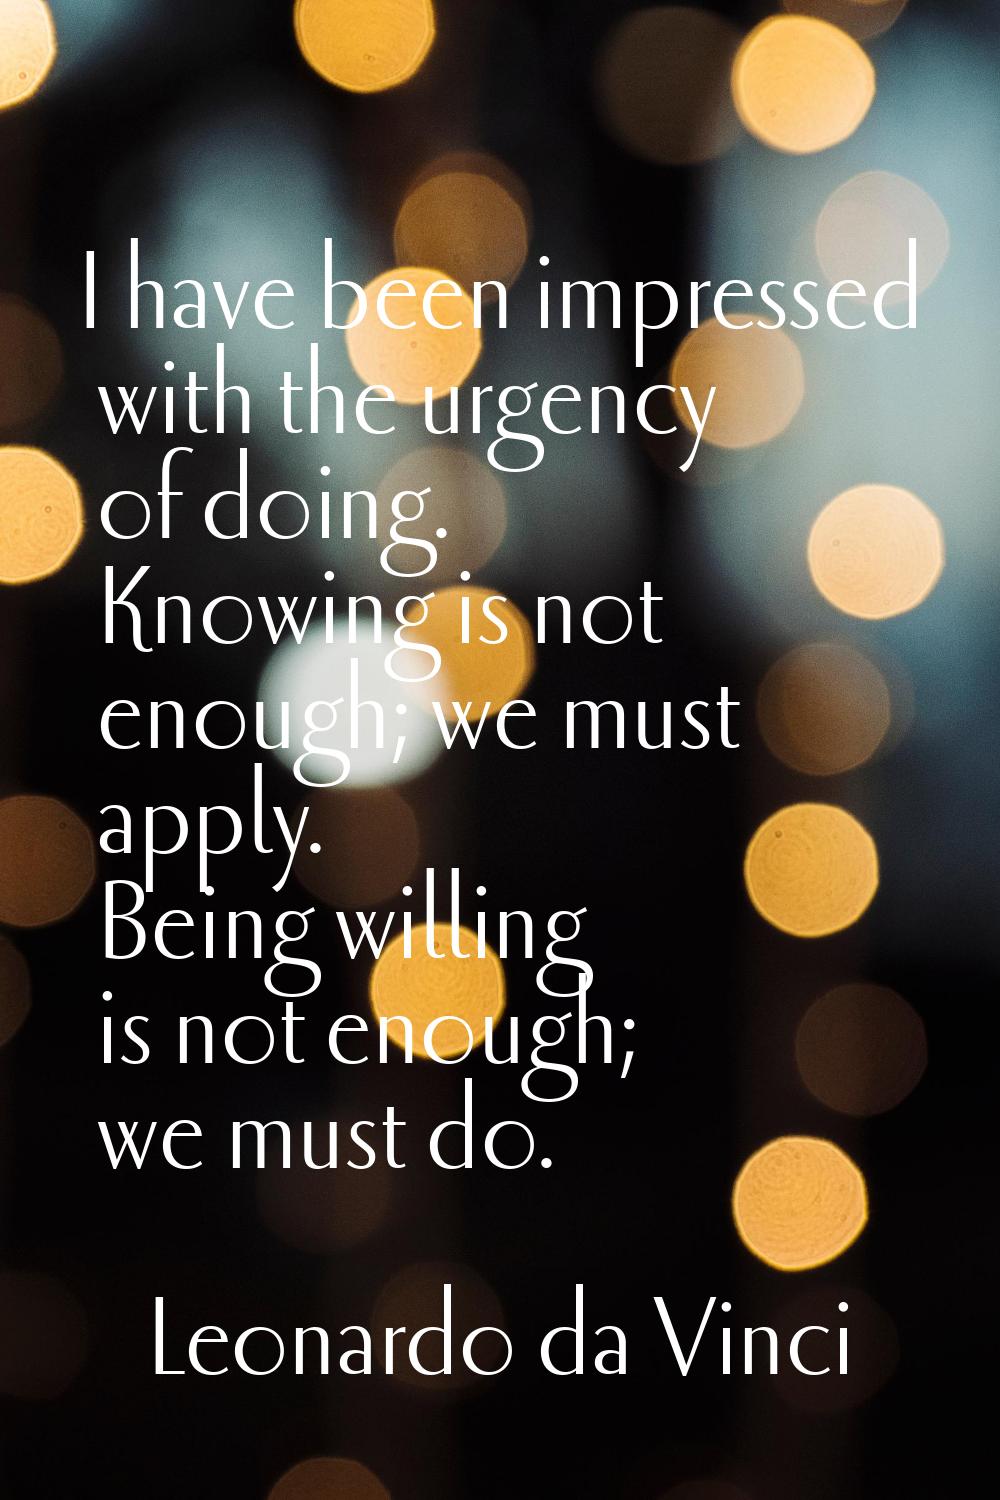 I have been impressed with the urgency of doing. Knowing is not enough; we must apply. Being willin